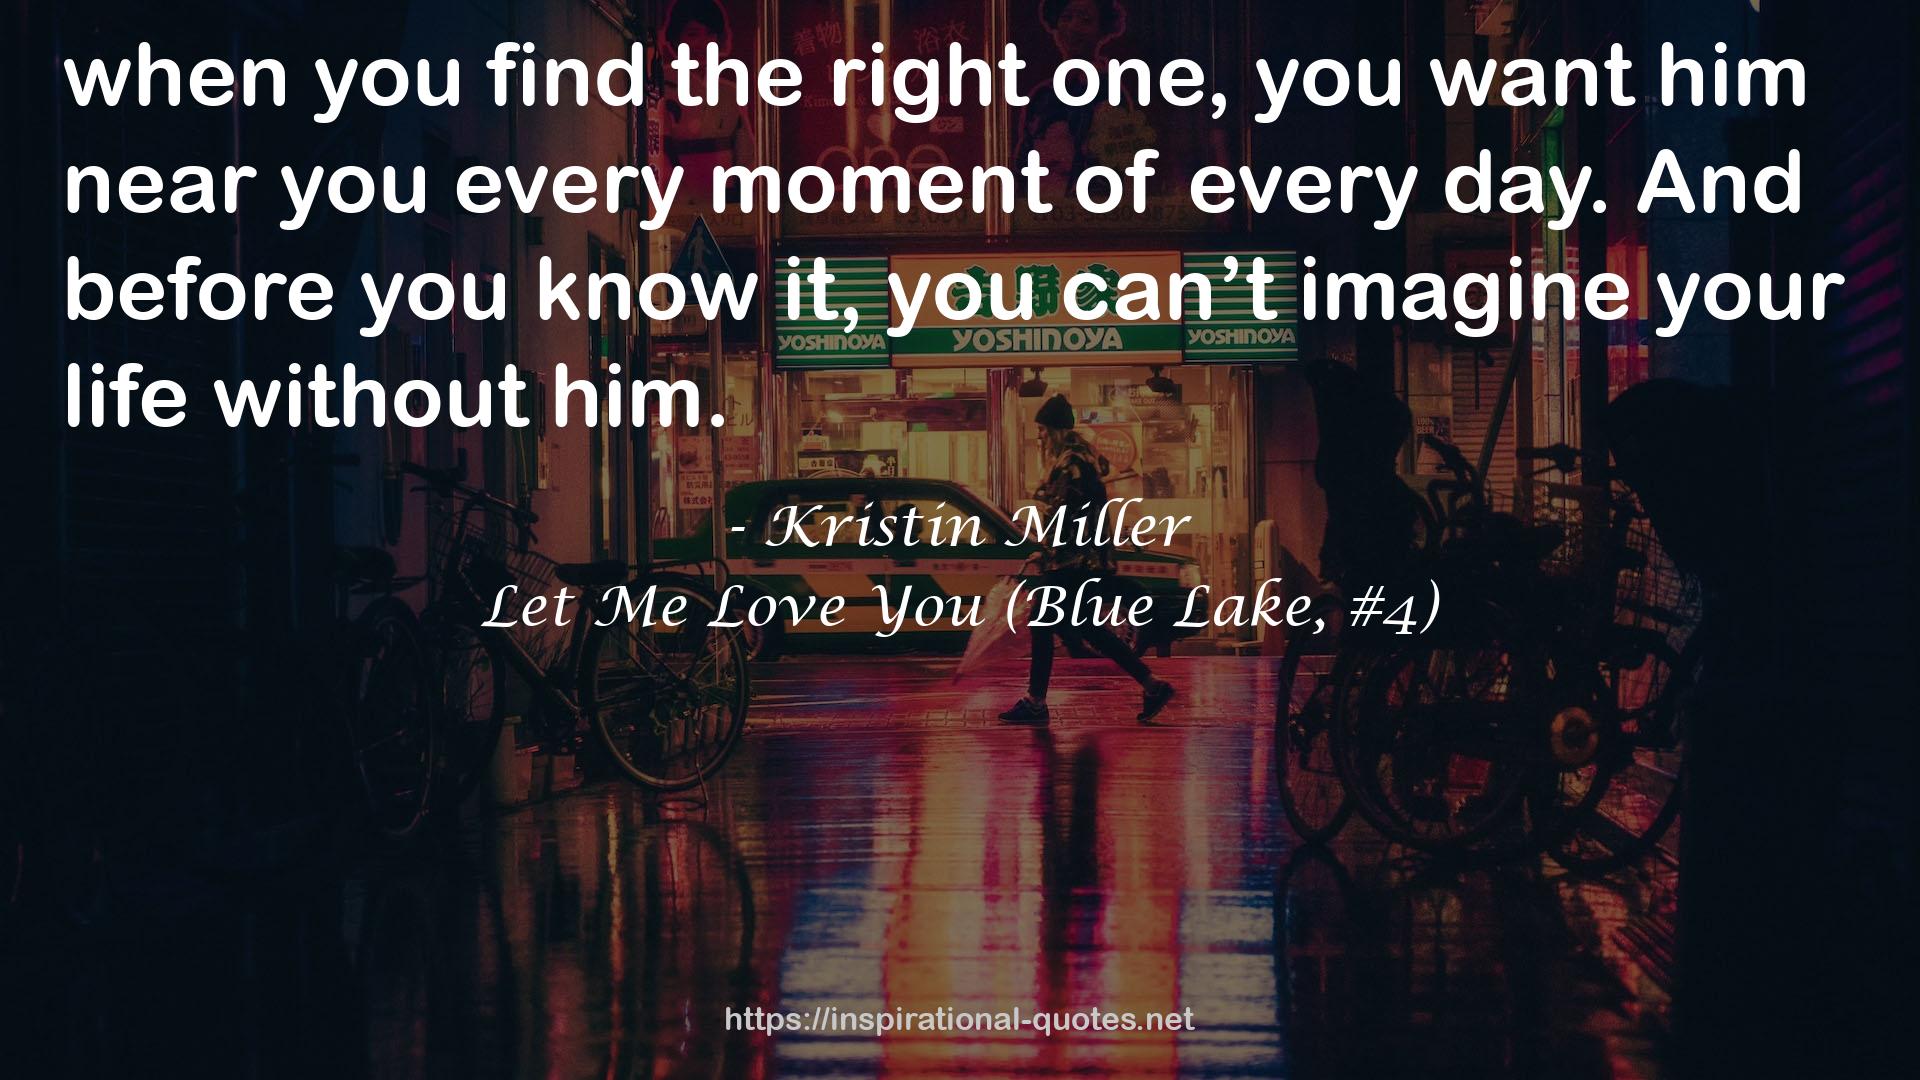 Let Me Love You (Blue Lake, #4) QUOTES